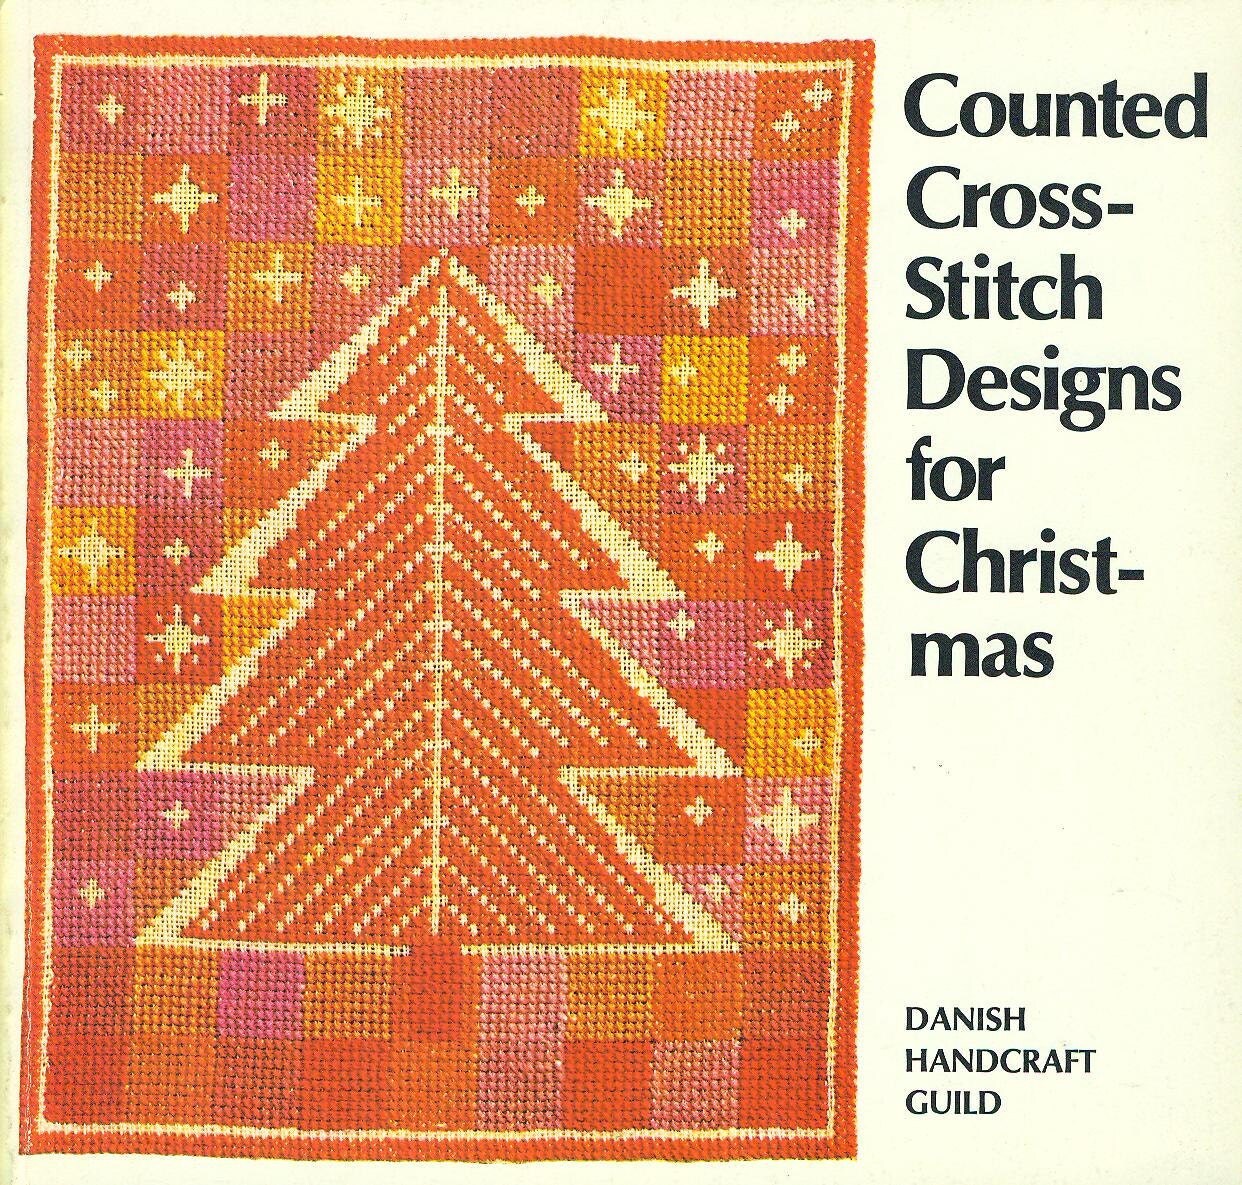 Counted Cross-Stitch Designs for Christmas Danish Handcraft Guild